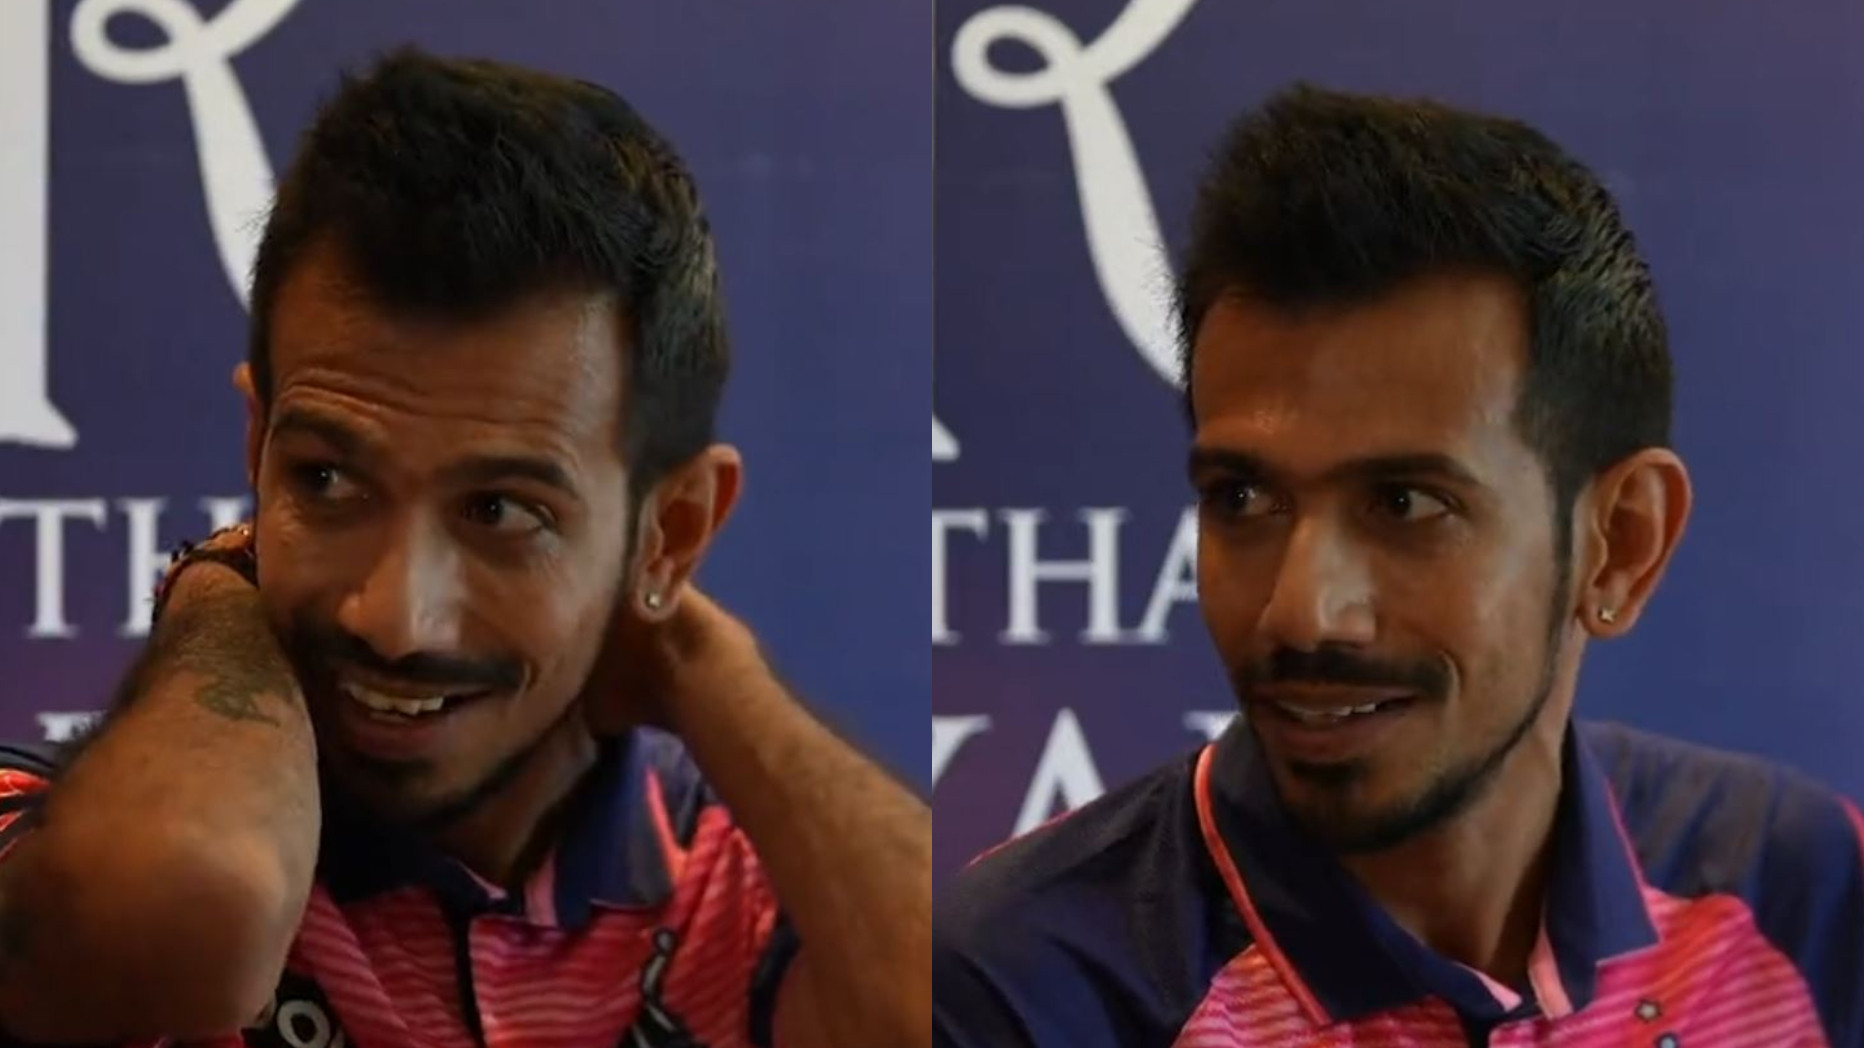 IPL 2022: WATCH - Chahal recalls scary story from MI days when a drunk player hung him over balcony from 15th floor